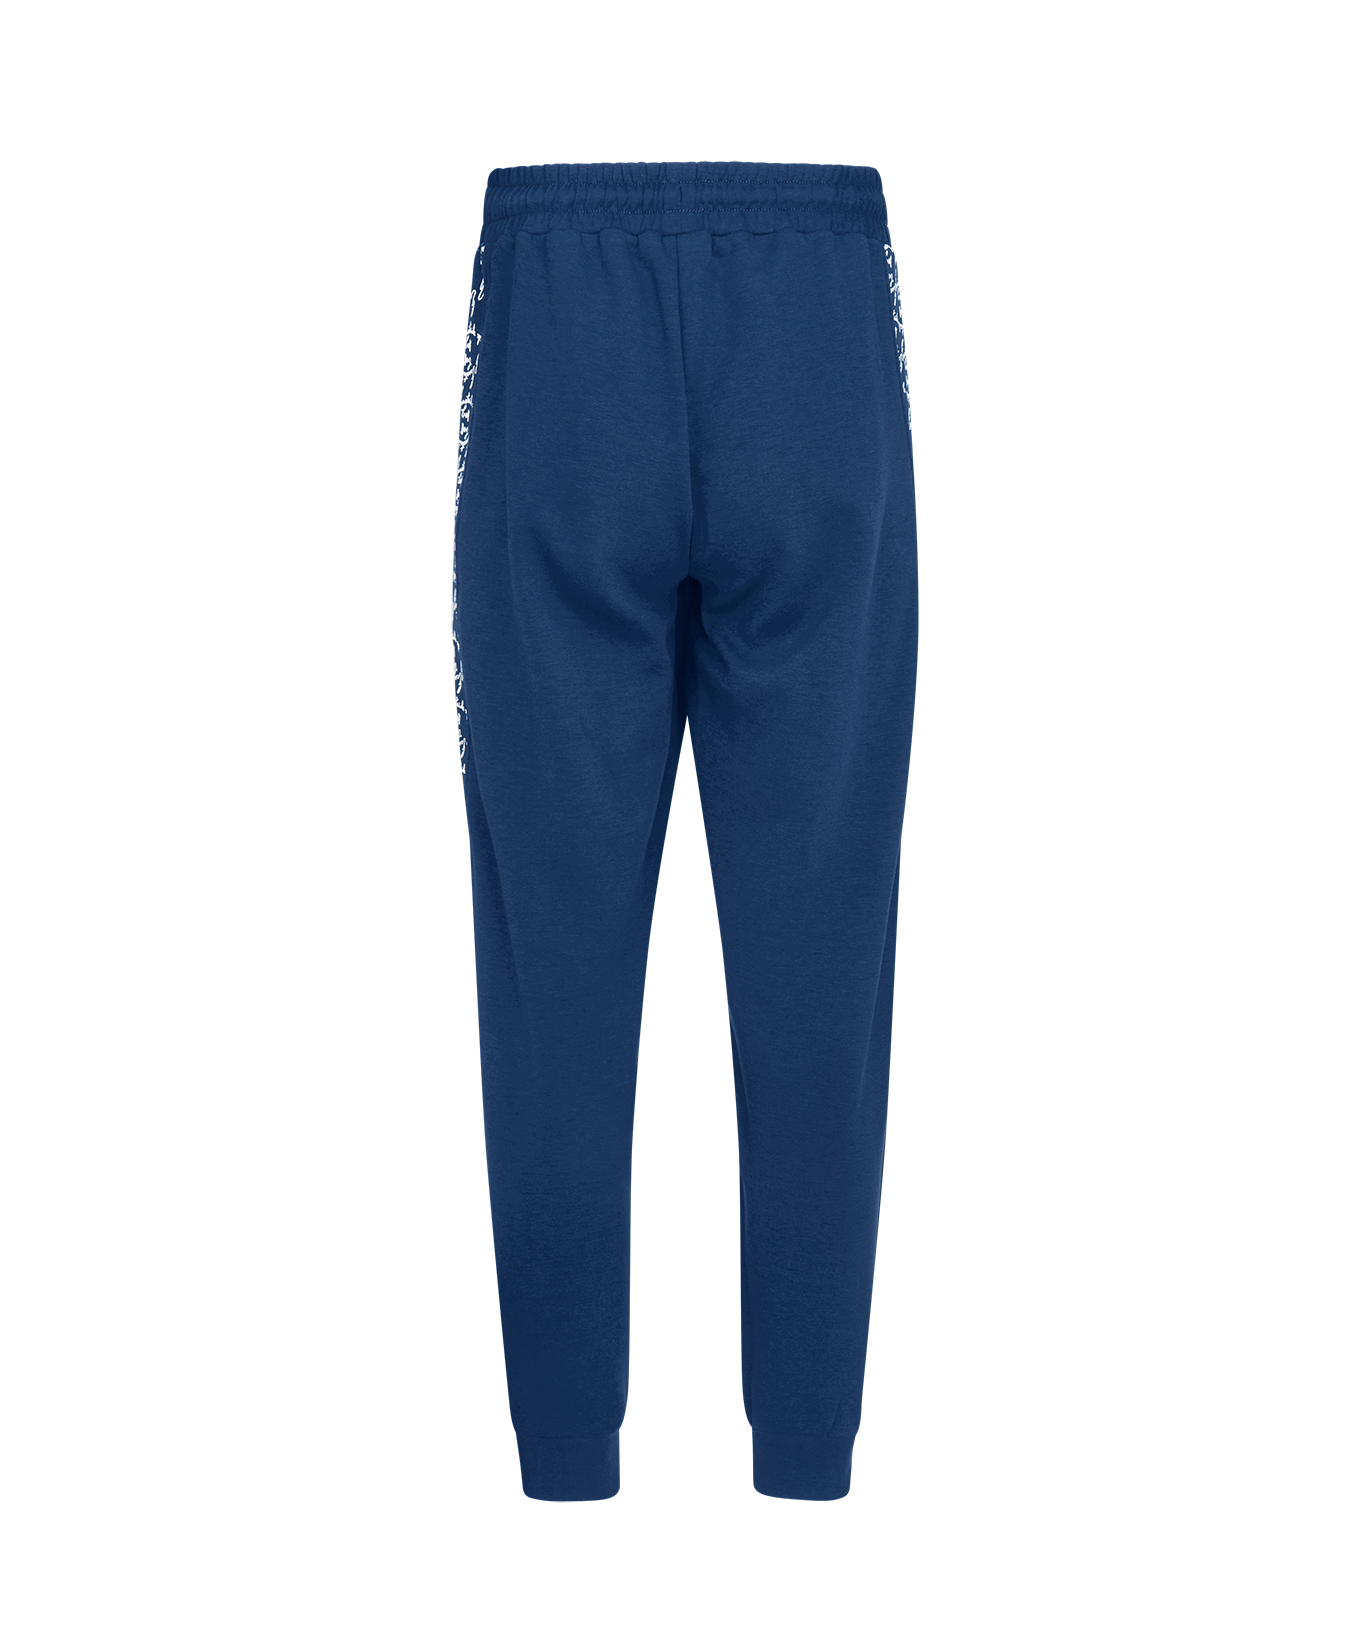 Navy White Track Suit Pant